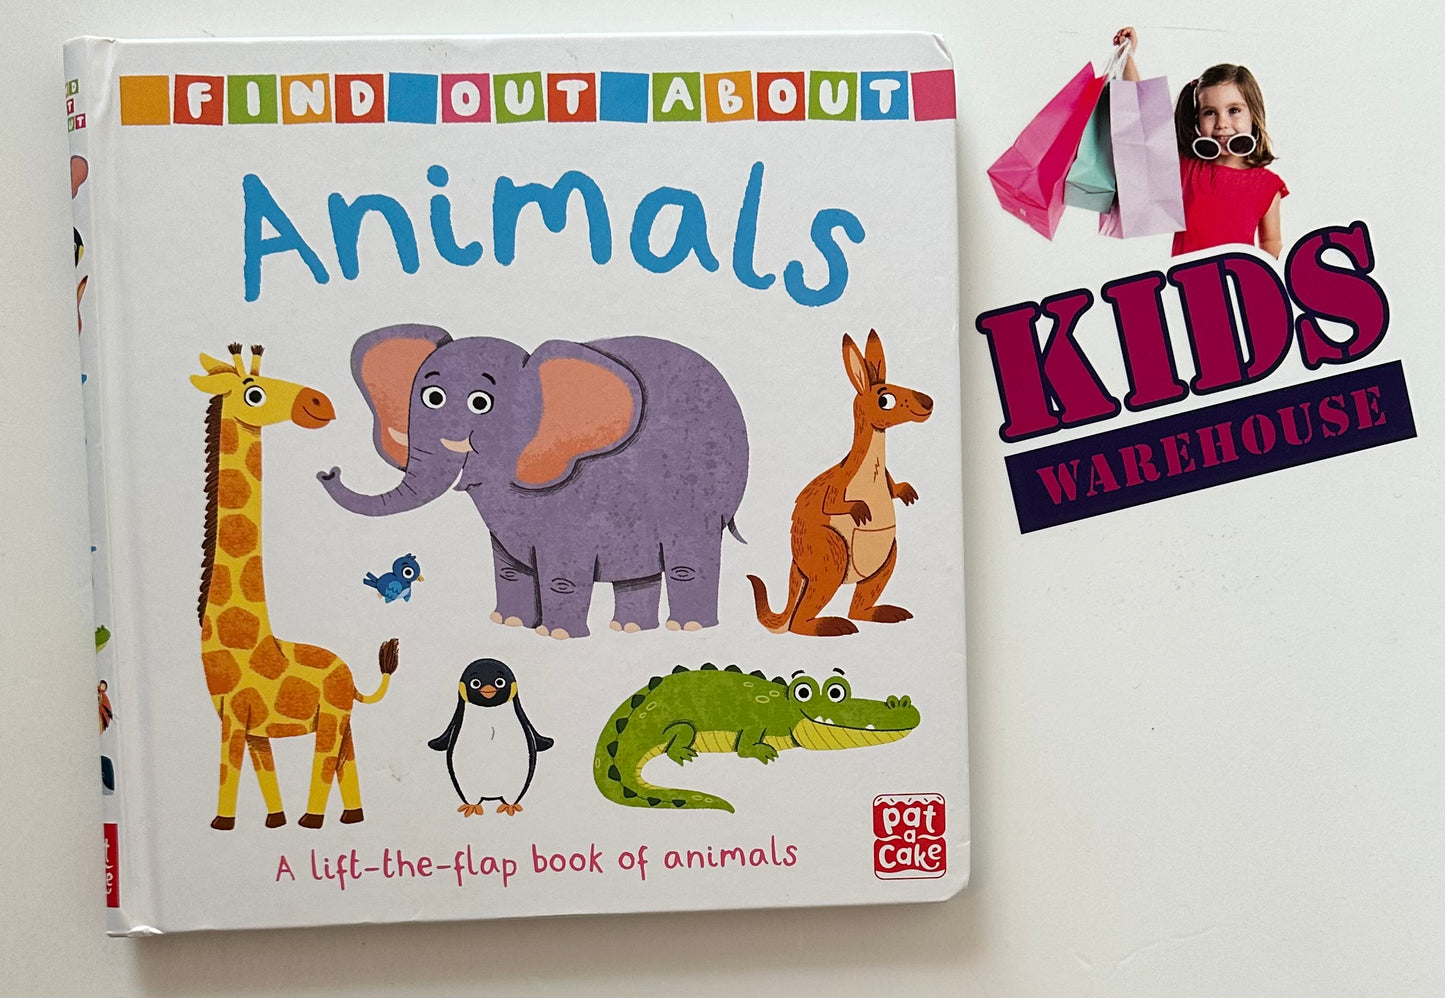 Find Out About Animals - A Lift the Flap Board Book of Animals